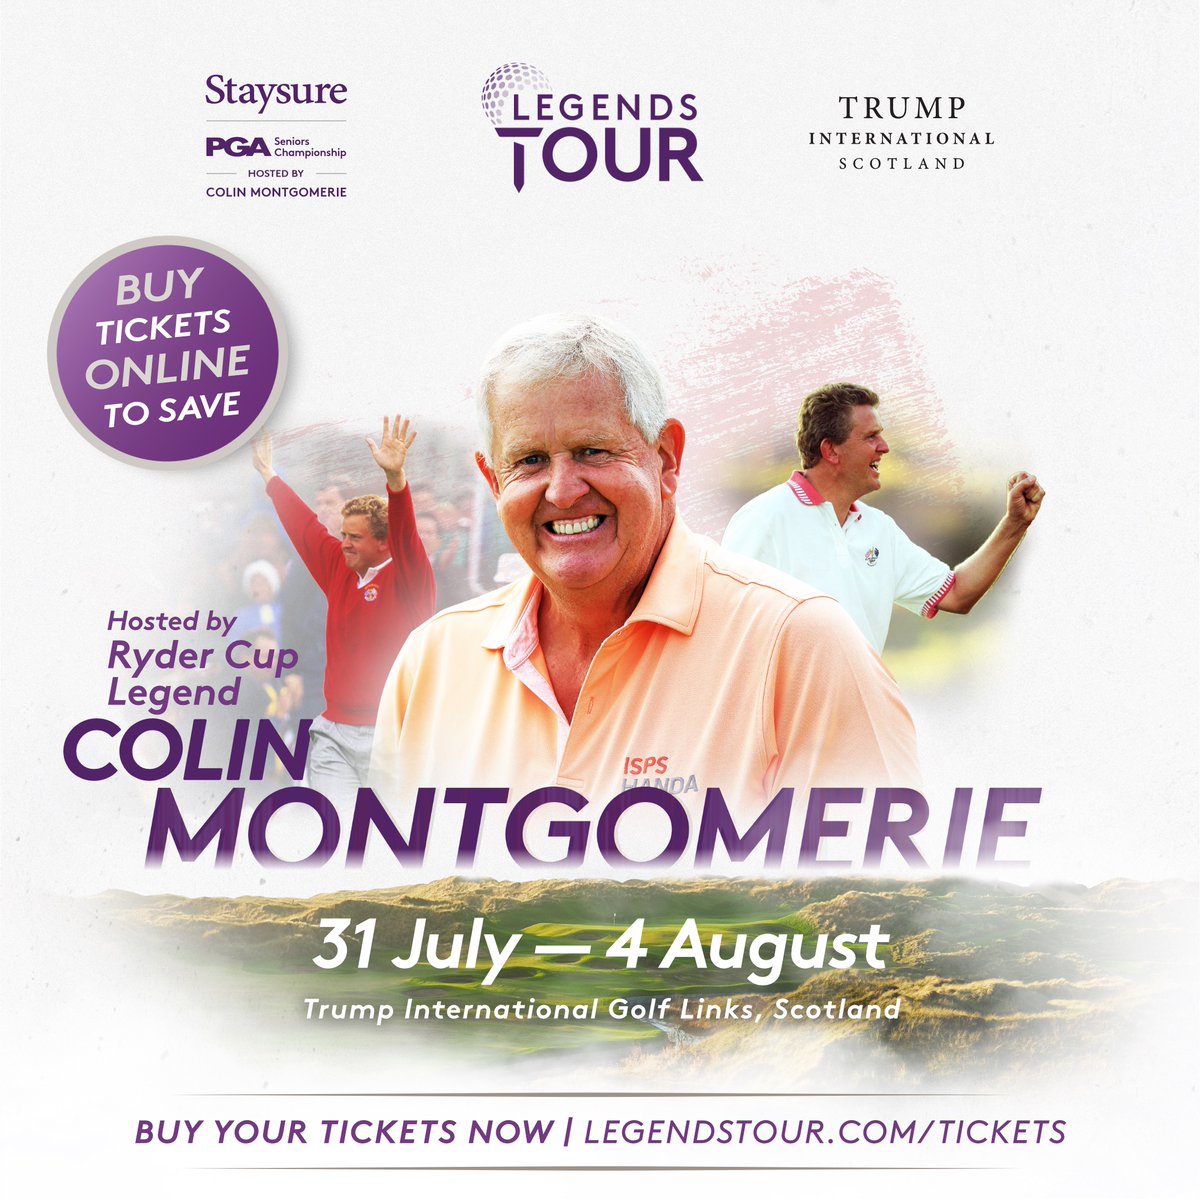 Straight after @Carnoustiegolf we head to @TrumpScotland for the Staysure PGA Seniors Championship hosted by @Montgomeriefdn - get your tickets NOW ow.ly/e6Sx50RARXR #SPGASC #euLegendsTour @staysure @thePGA